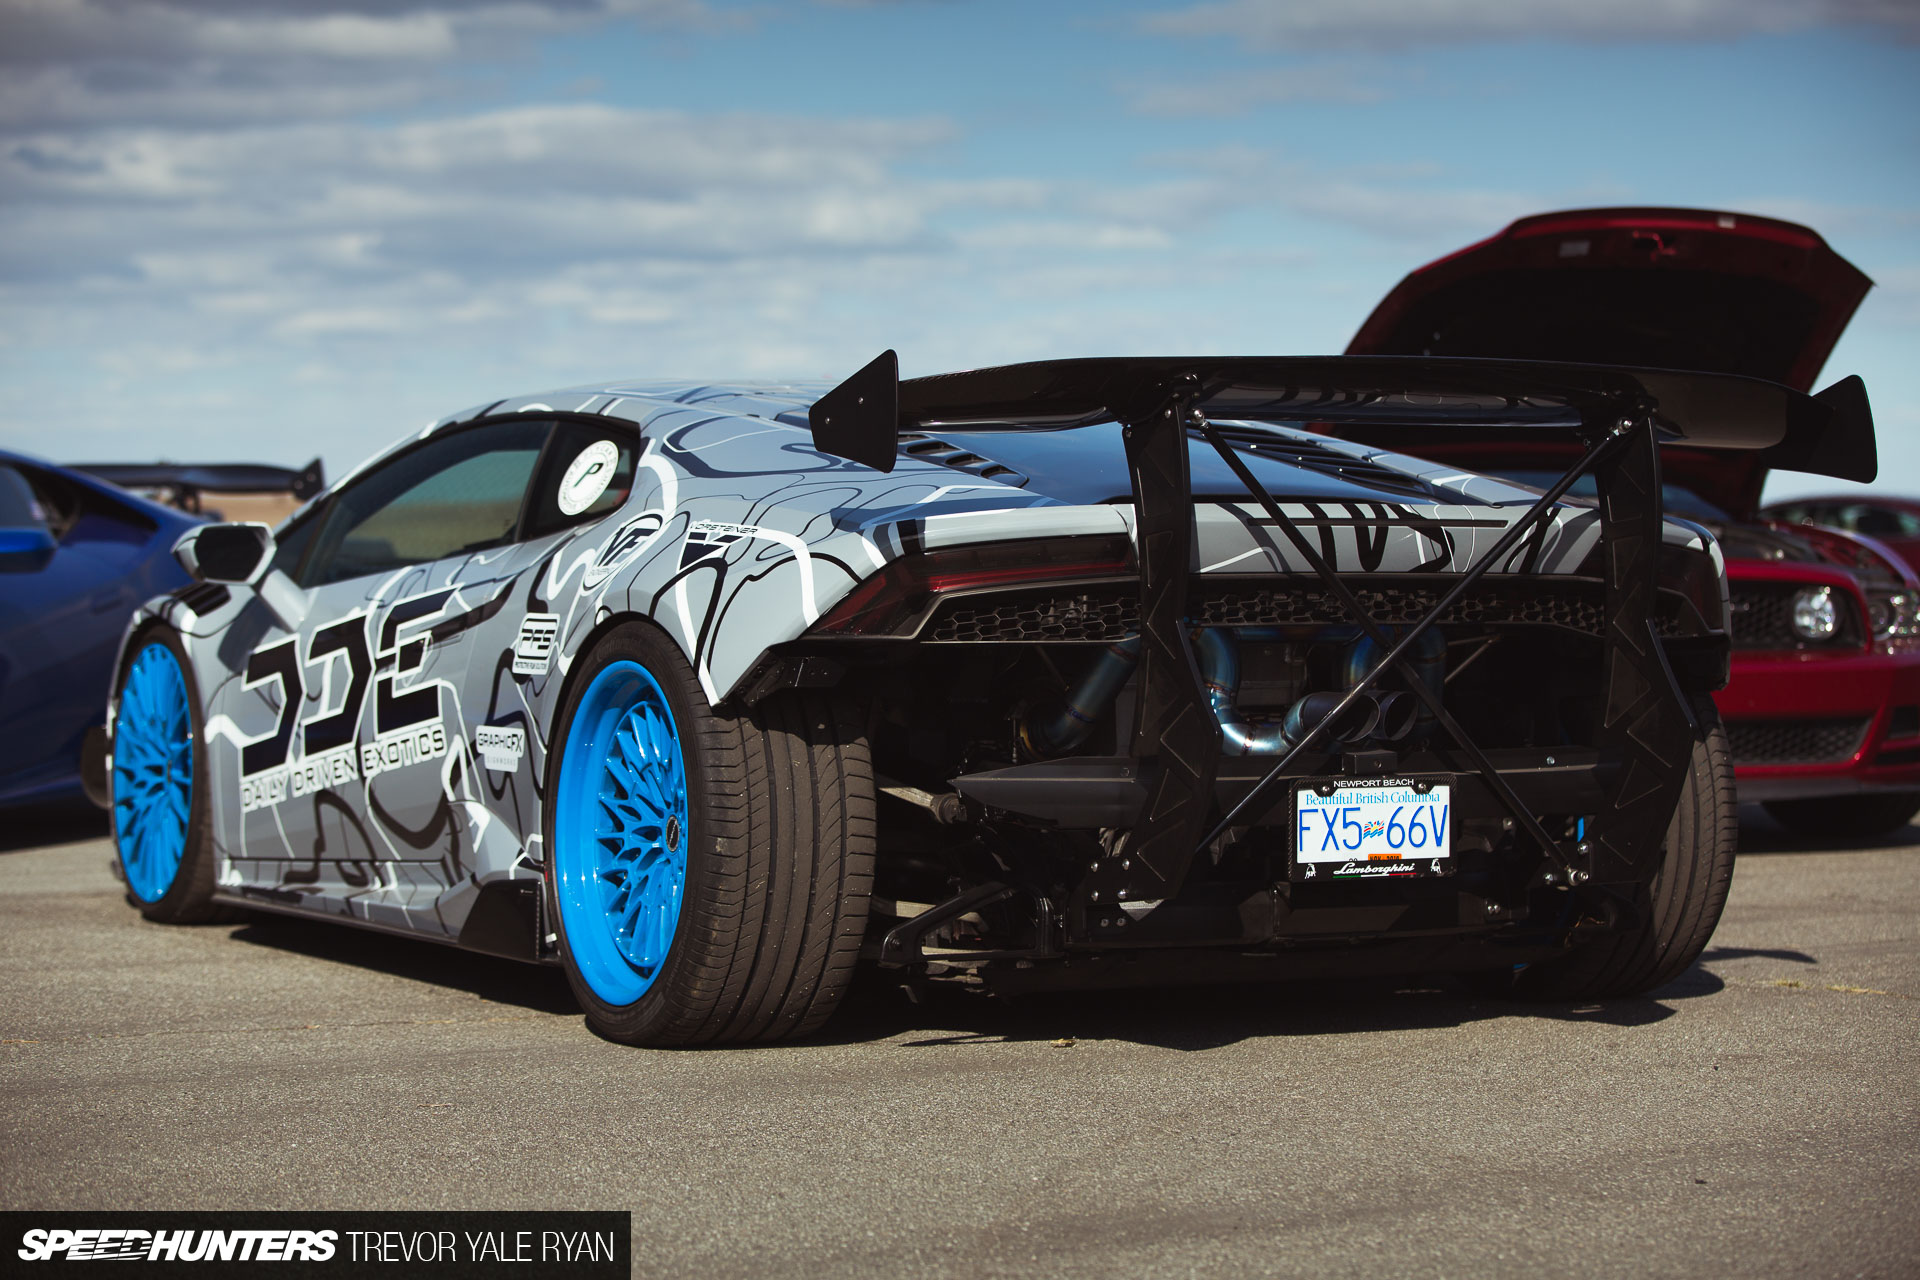 The Best Of The Best At The Never Lift Half Mile - Speedhunters